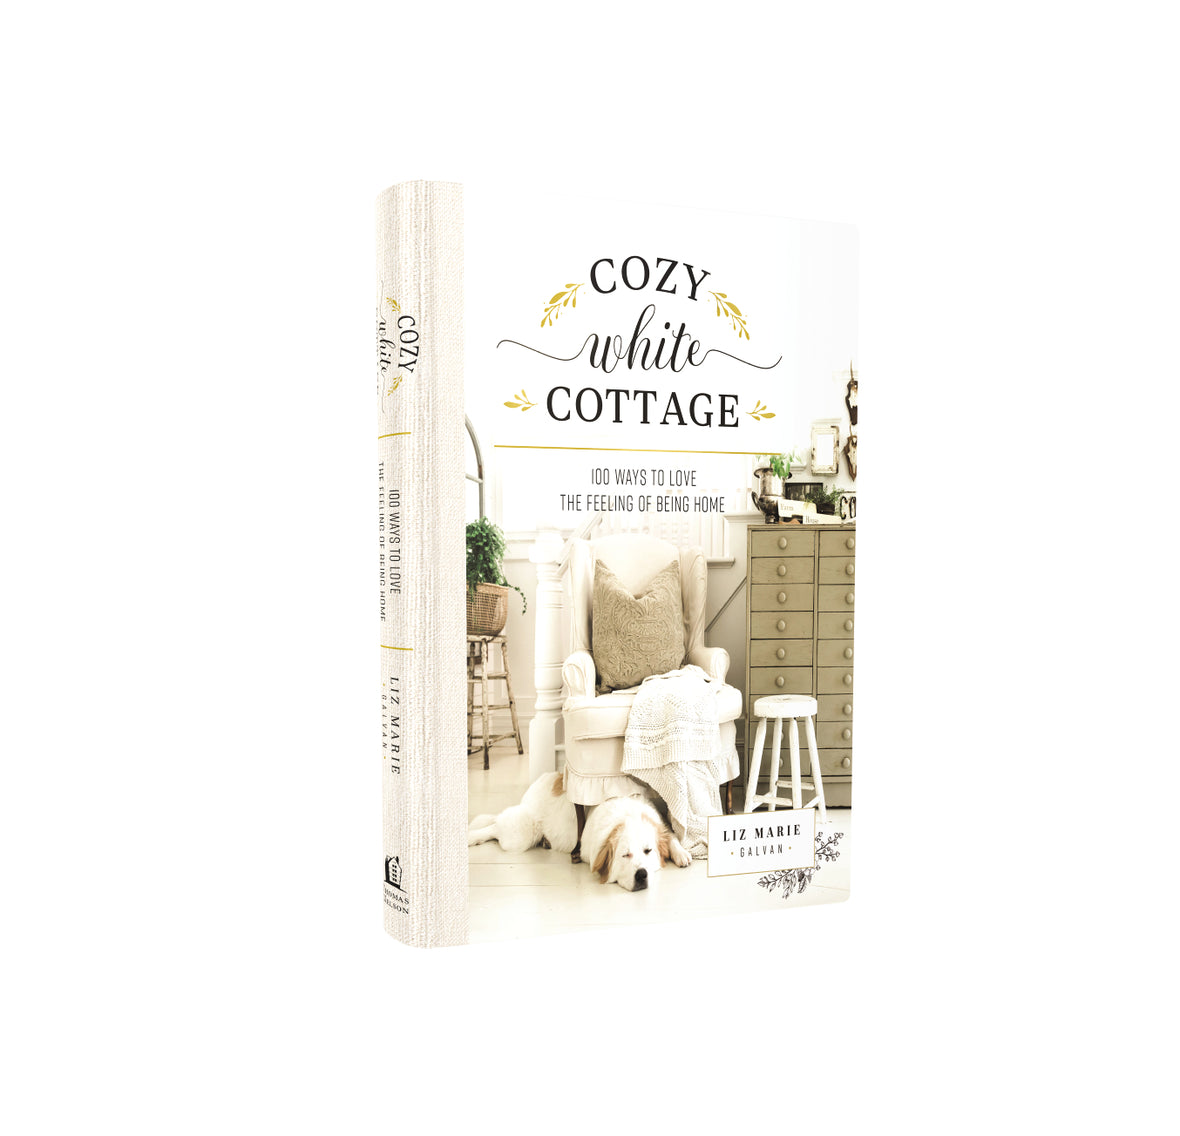 The Best Christmas Gifts For Her - Cozy White Cottage Christmas Gifts - Liz  Marie Blog